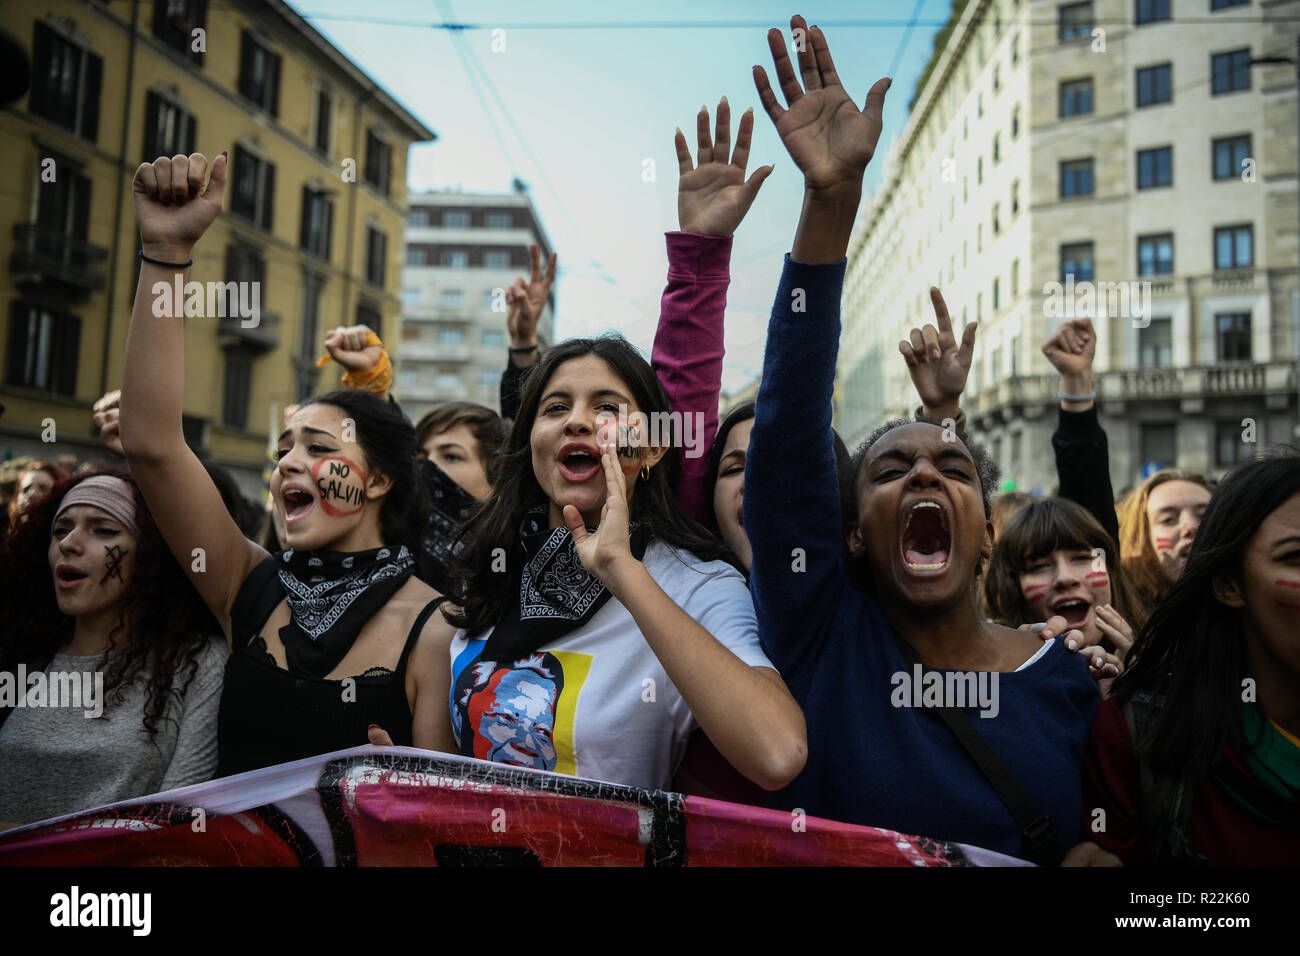 Milan, Italy - November 16, 2018: Young female protesters chant and display notes on their cheeks that read 'No Salvini' while demonstrating during the 'No Salvini Day' students protest Credit: Piero Cruciatti/Alamy Live News Stock Photo